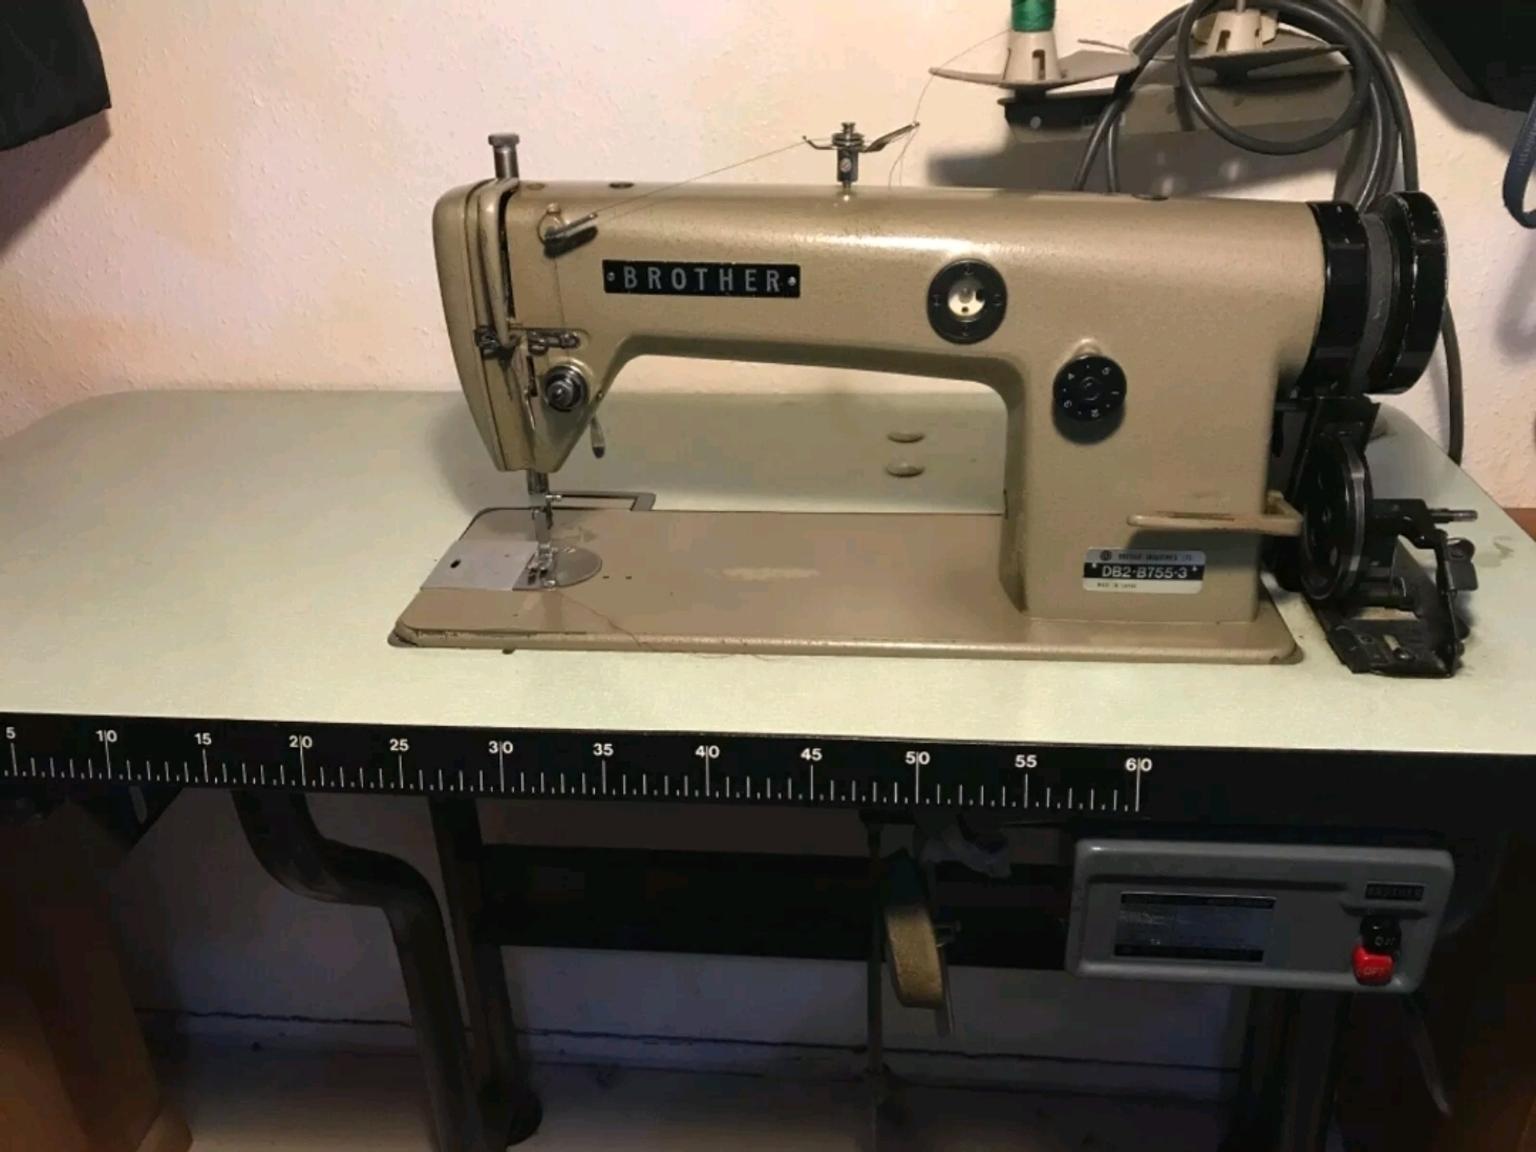 Brother Db2b755 3 Industrial Sewing Machine In E11 Forest Fur